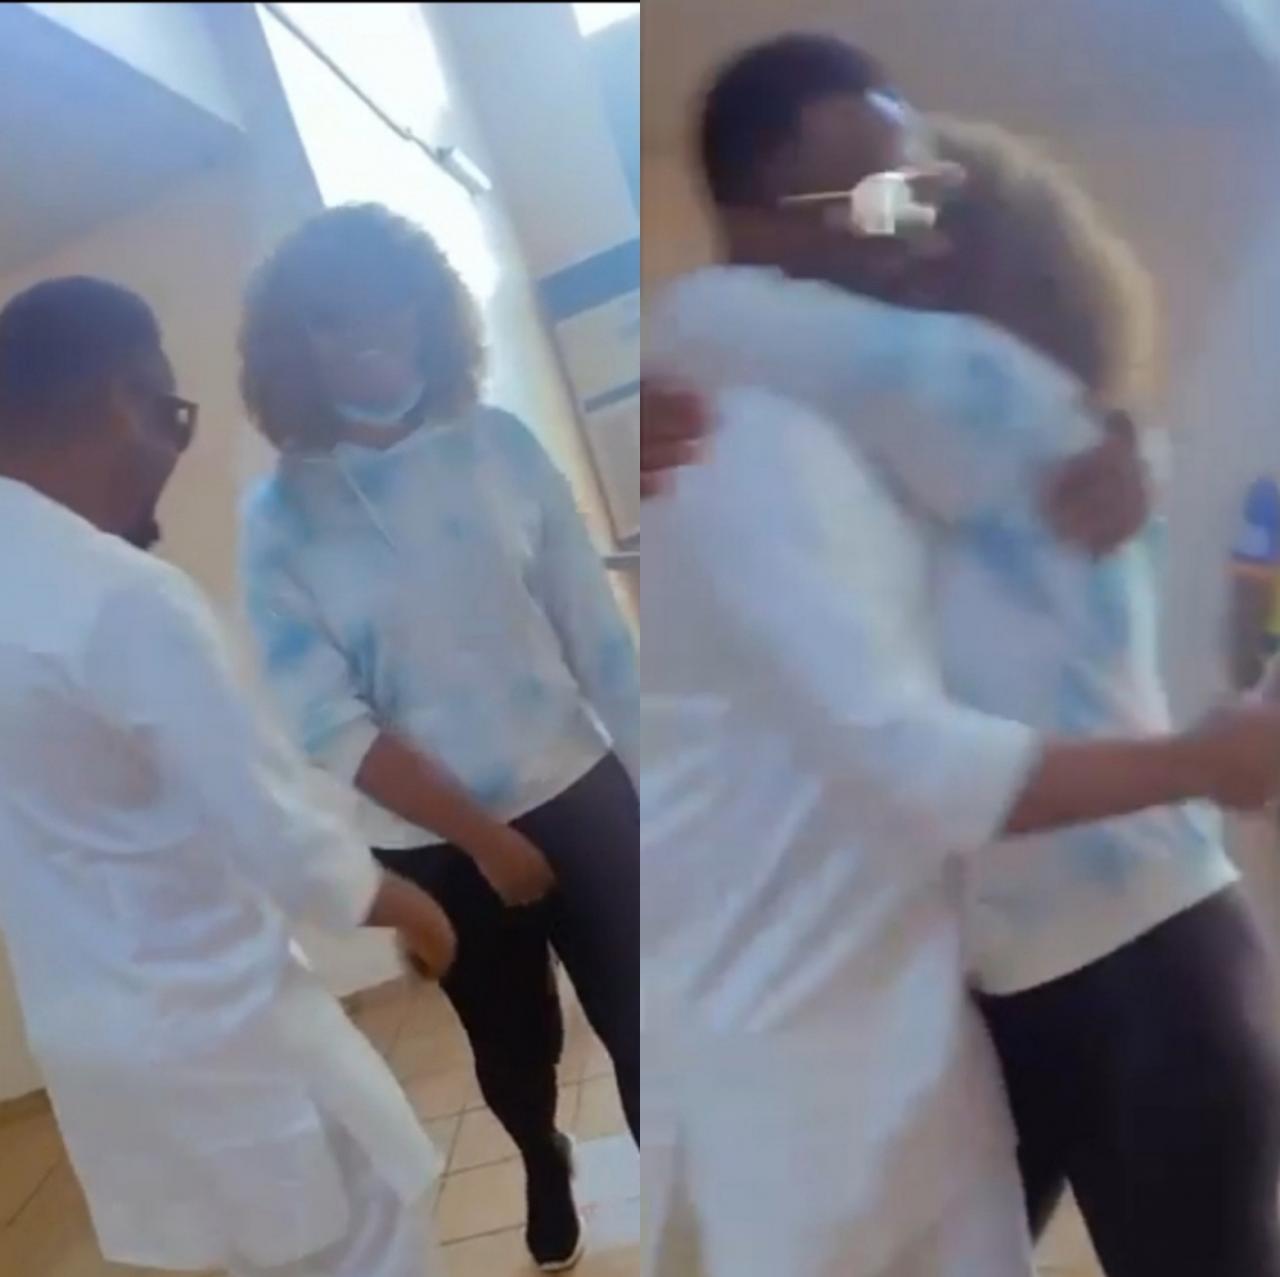 Zubby Michael and Chizzy Alichi hug and make up weeks after publicly calling each other out (video)